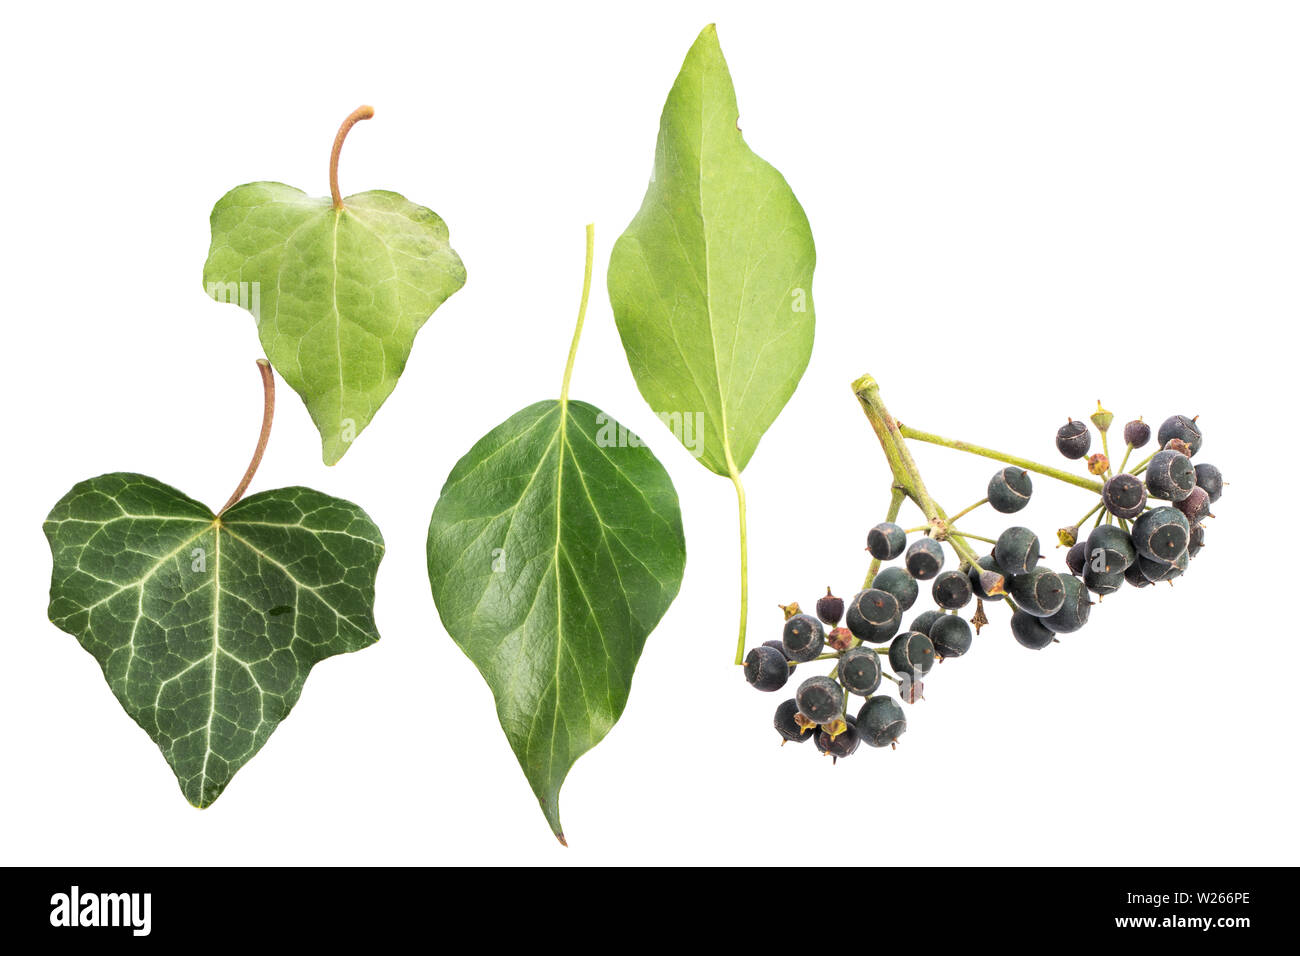 healing / medicinal plants: healing plant studies: Ivy (Hedera helix) Old and young leaves / front-rear / berries isolated on white background Stock Photo